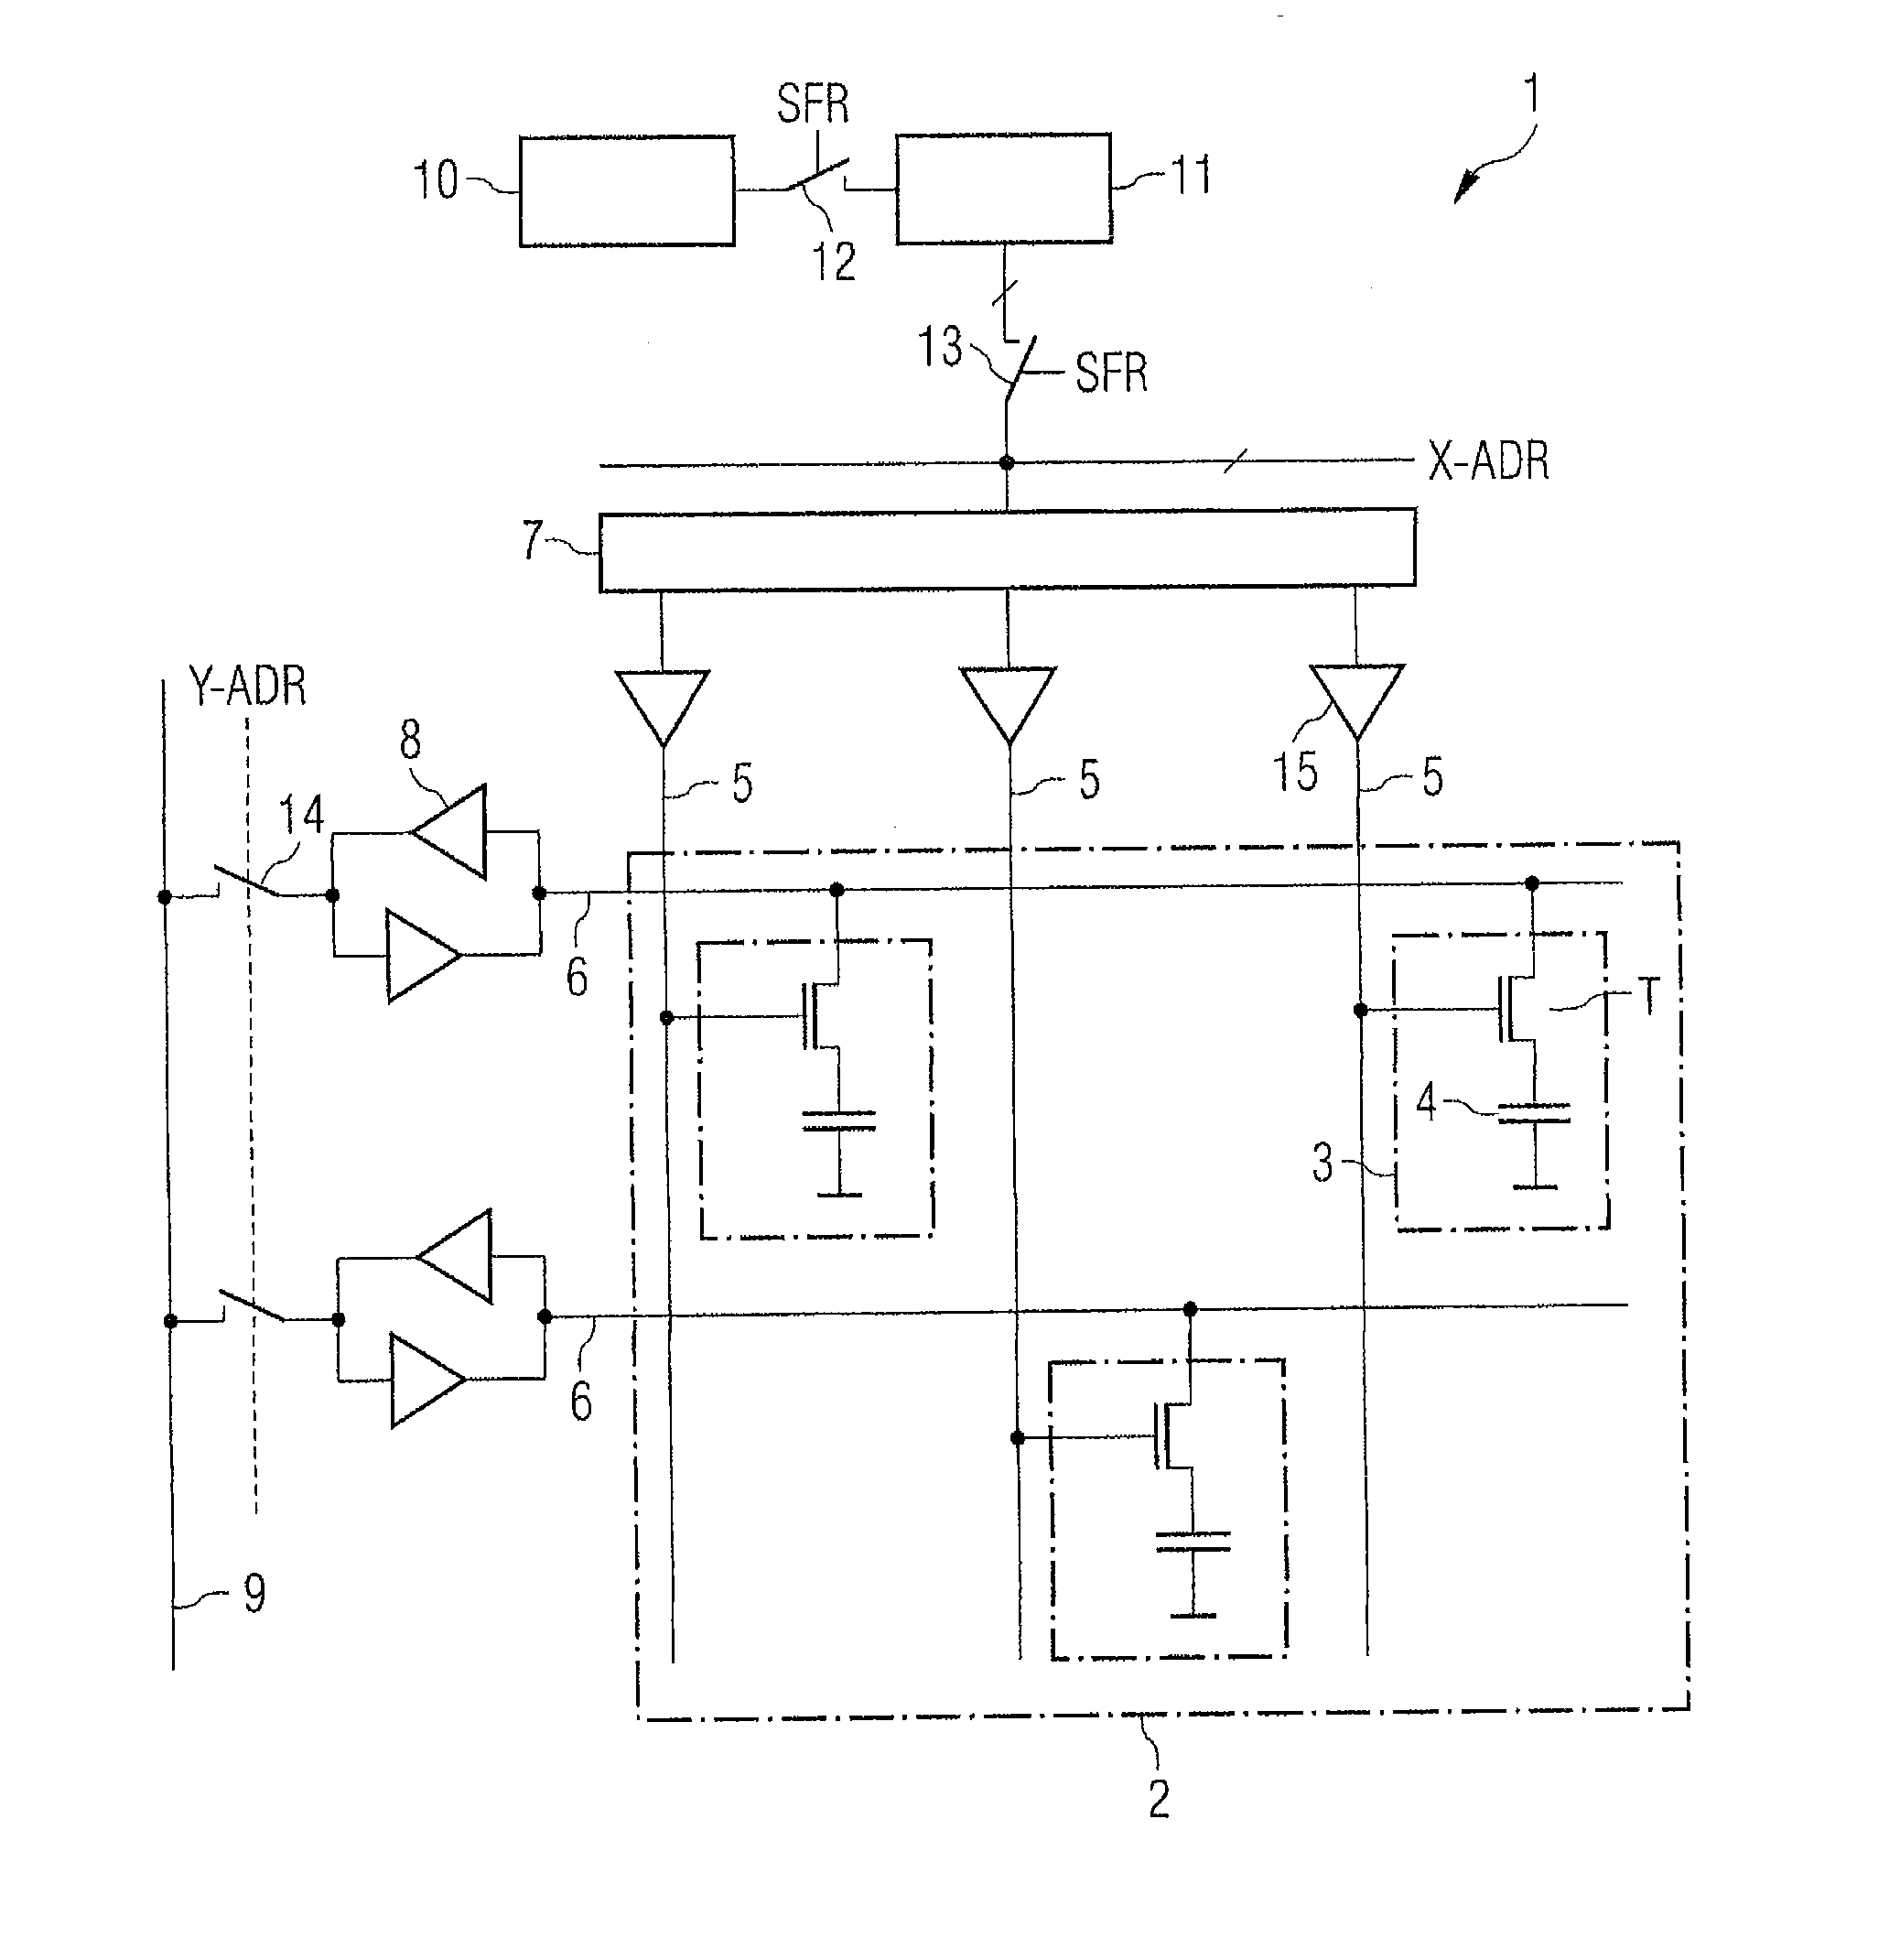 Memory circuit and method for refreshing dynamic memory cells